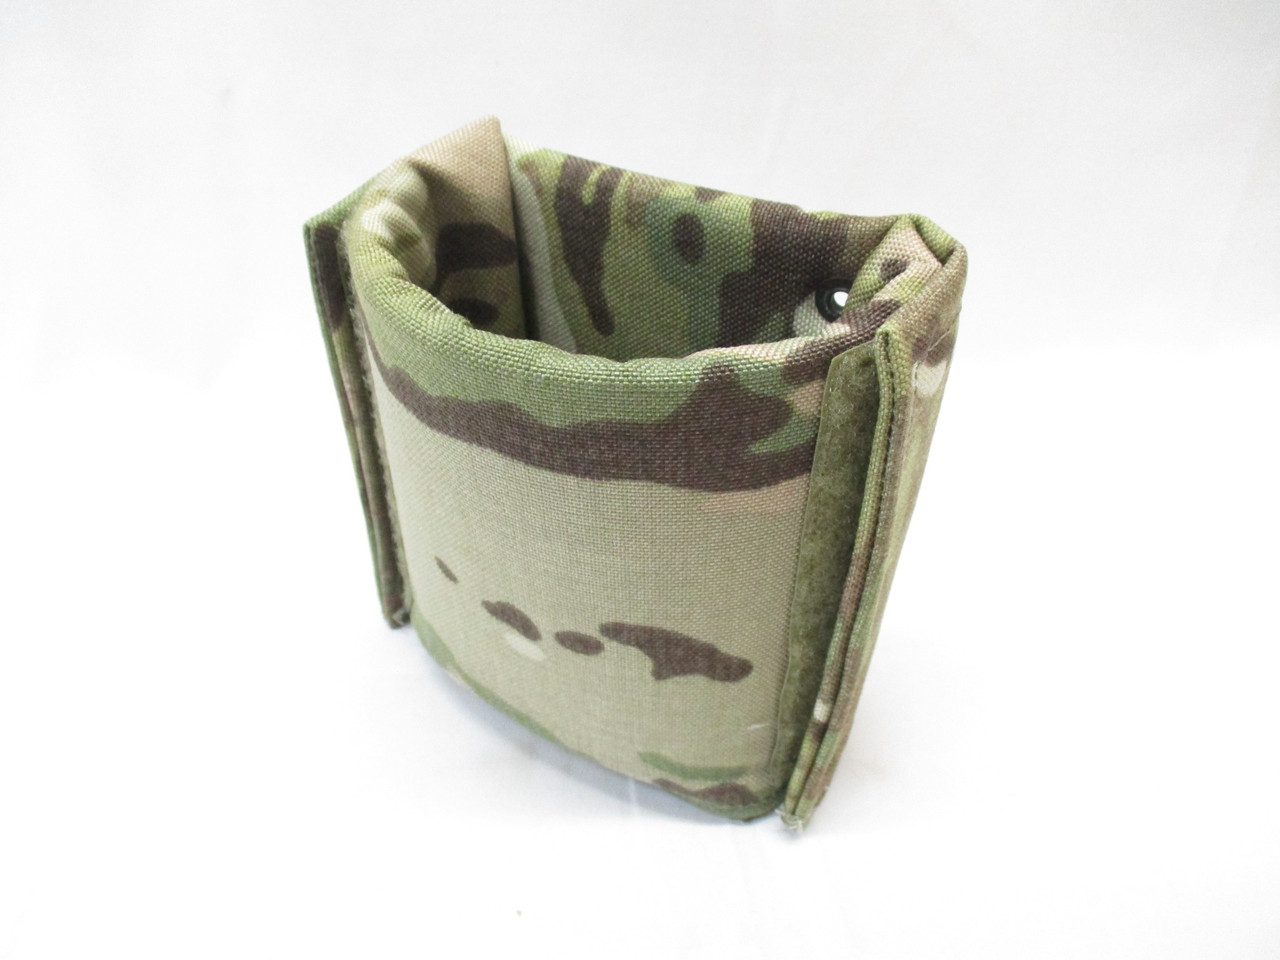 NEW MILITARY 1 QUART CANTEEN POUCH PROTECTIVE PADDED INSERT PVS-14 OCP/MULTICAM